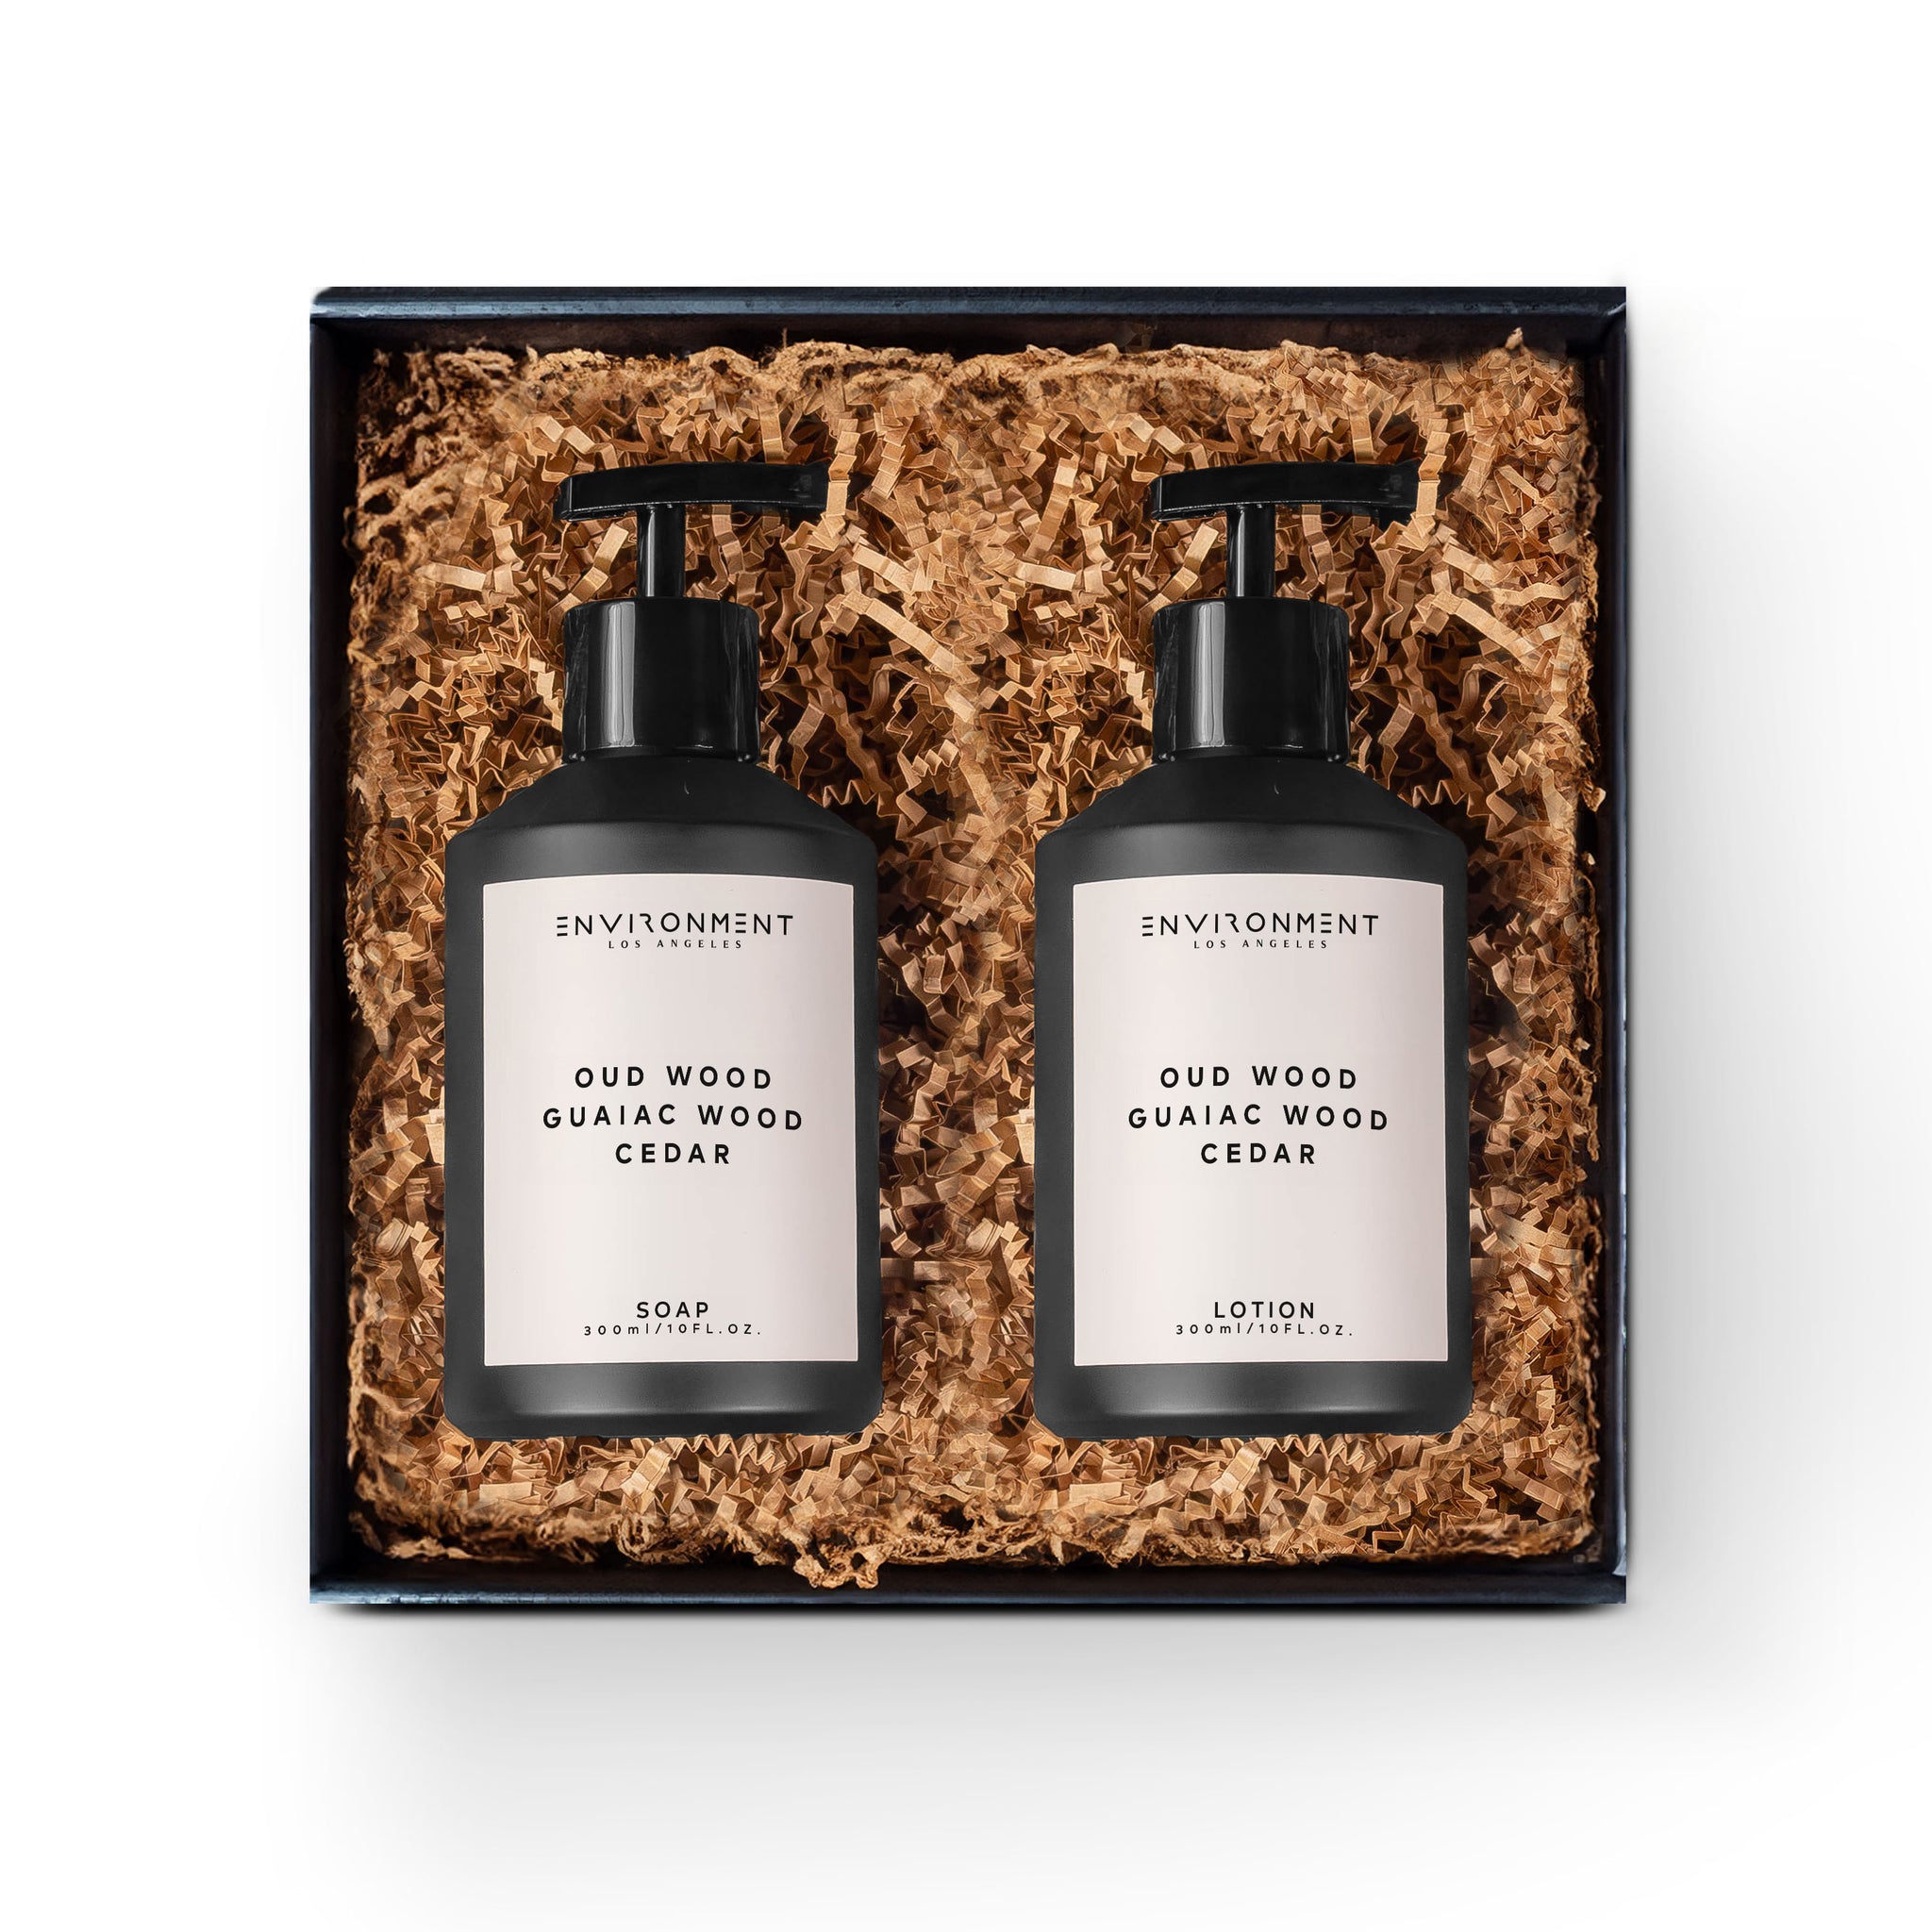 Oud Wood | Guaiac Wood | Cedar 300ml Hand Soap and 300ml Lotion Gift Pack (Inspired by Tom Ford Oud Wood®)